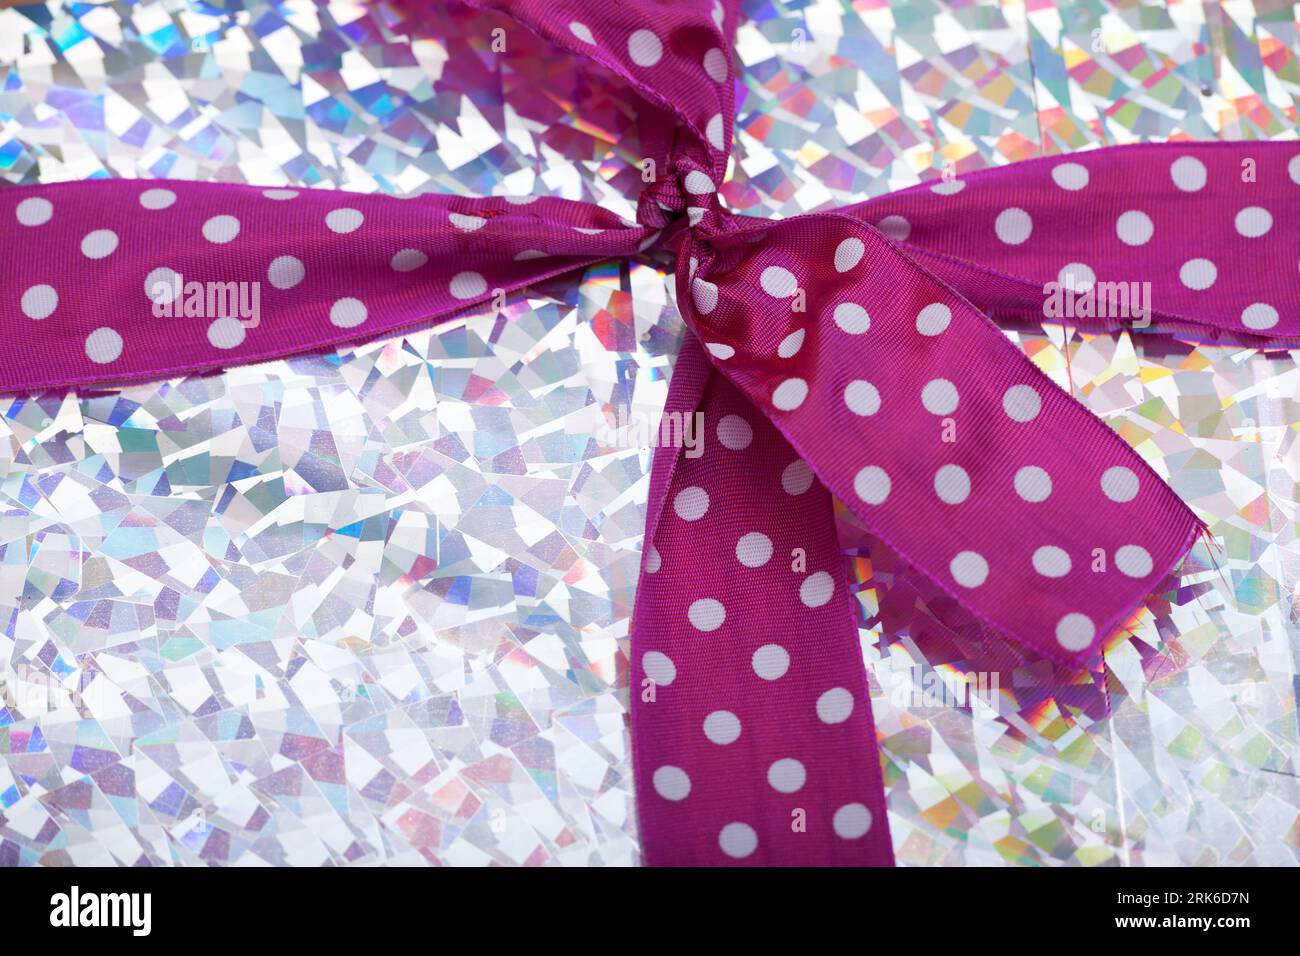 detail of a gift with a bow Stock Photo